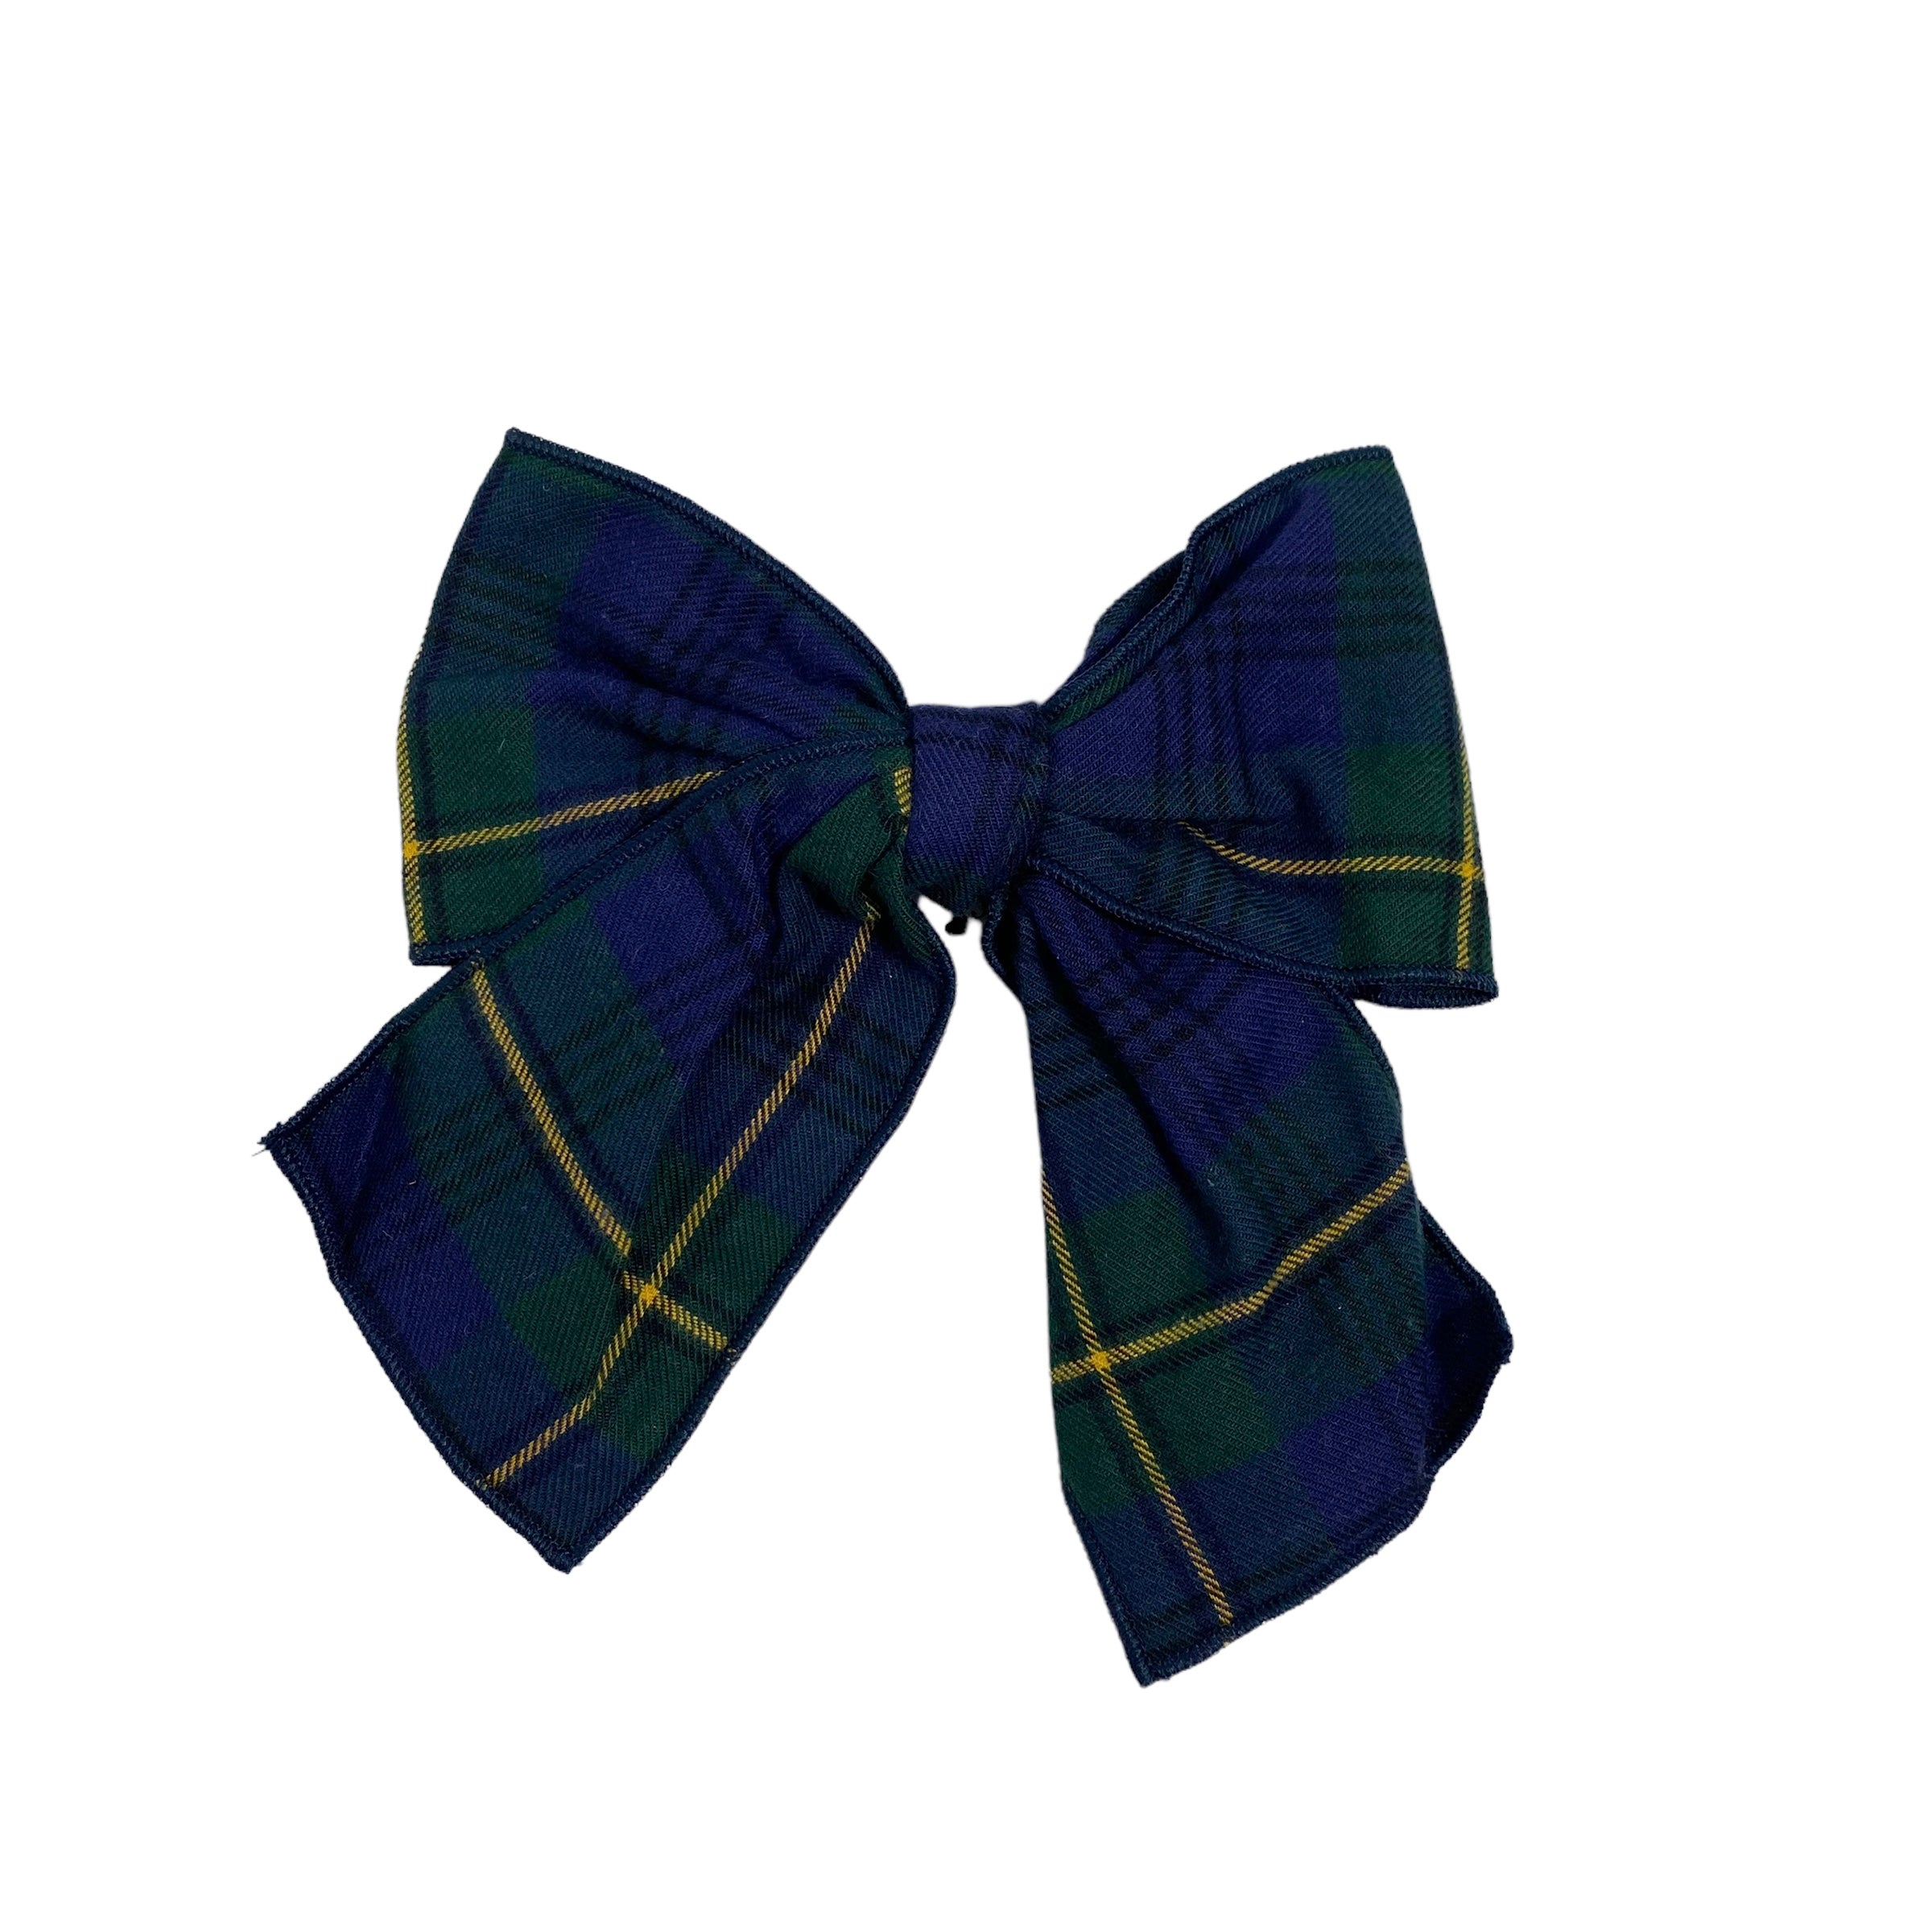 Fermaglio Con Fiocco Tartan Bambina PHI CLOTHING 22630 - PHY CLOTHING - LuxuryKids